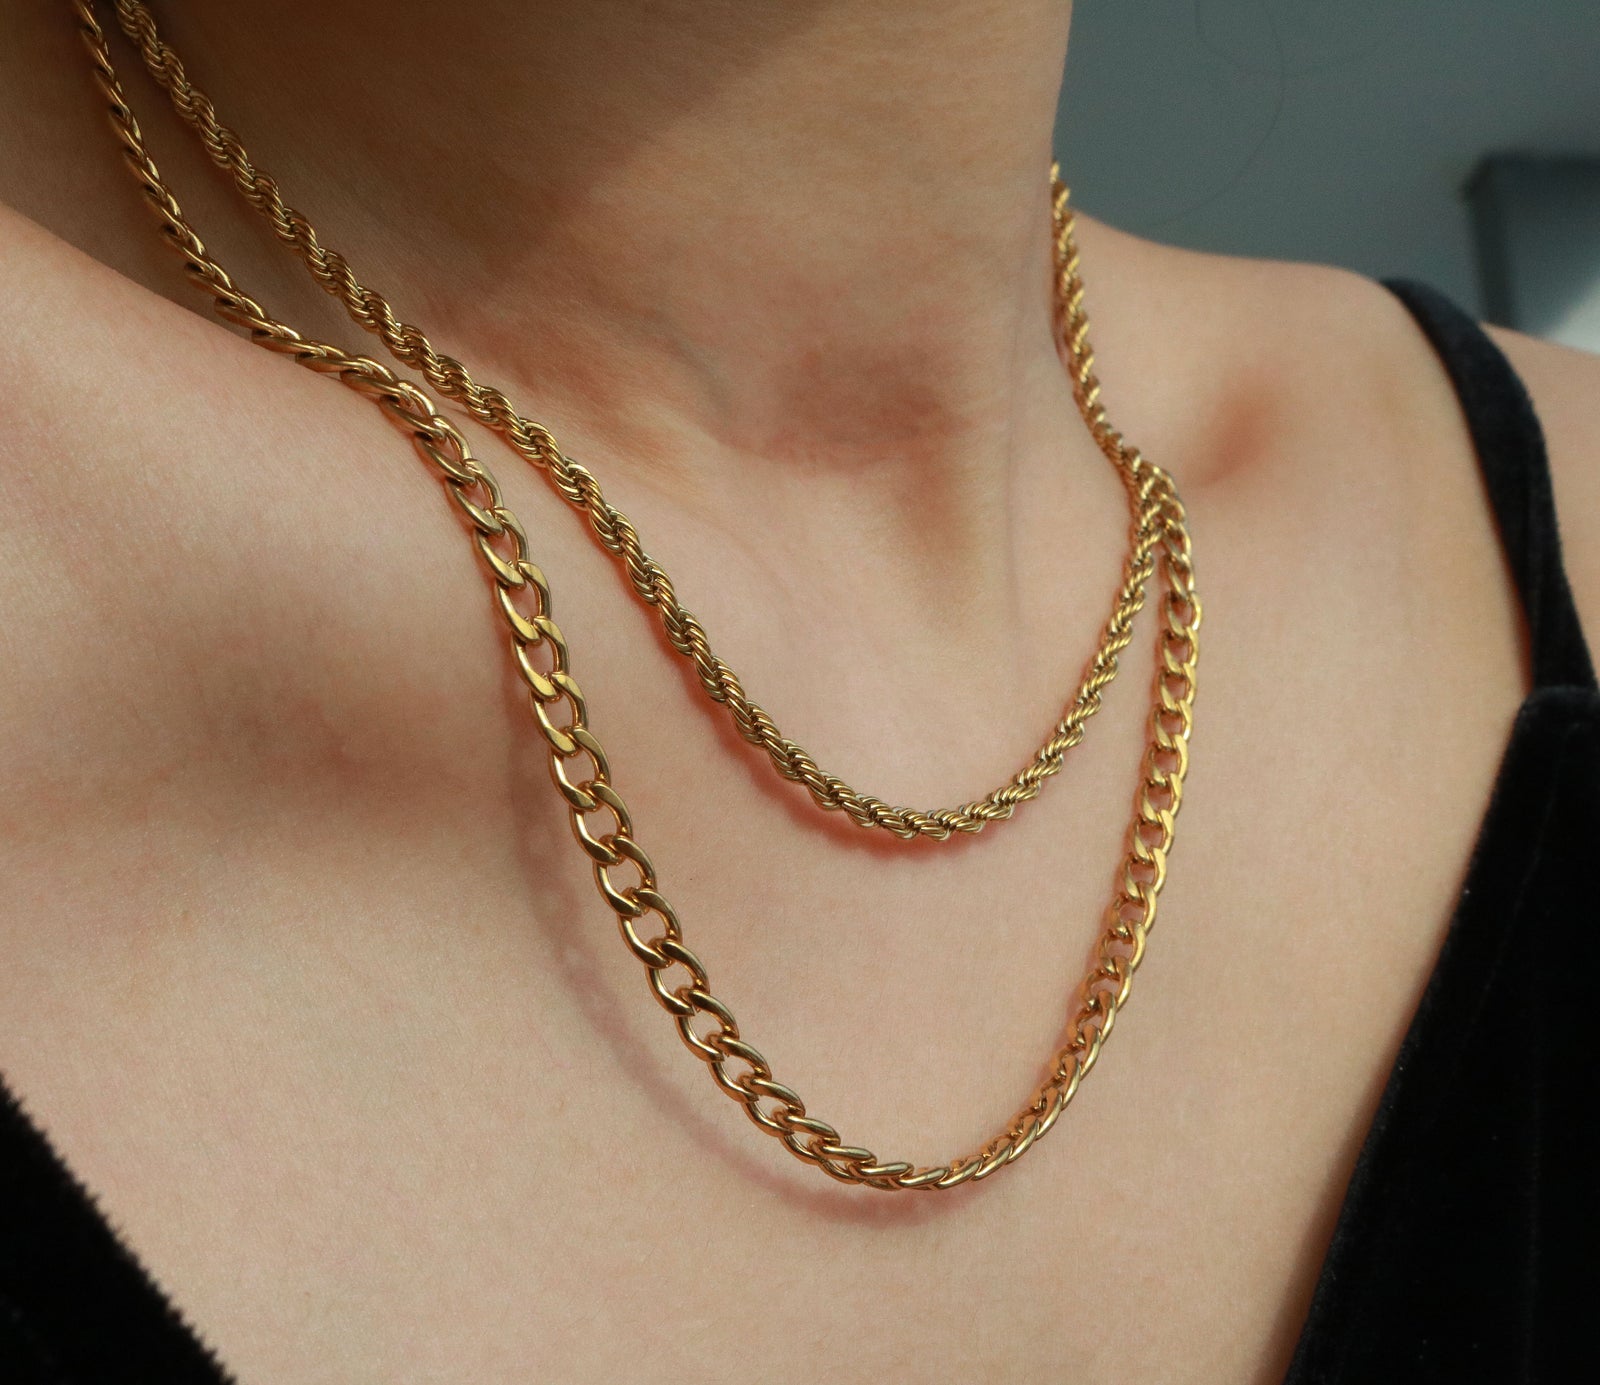 Meideya Jewelry - Layered rope chain necklace in 18k gold